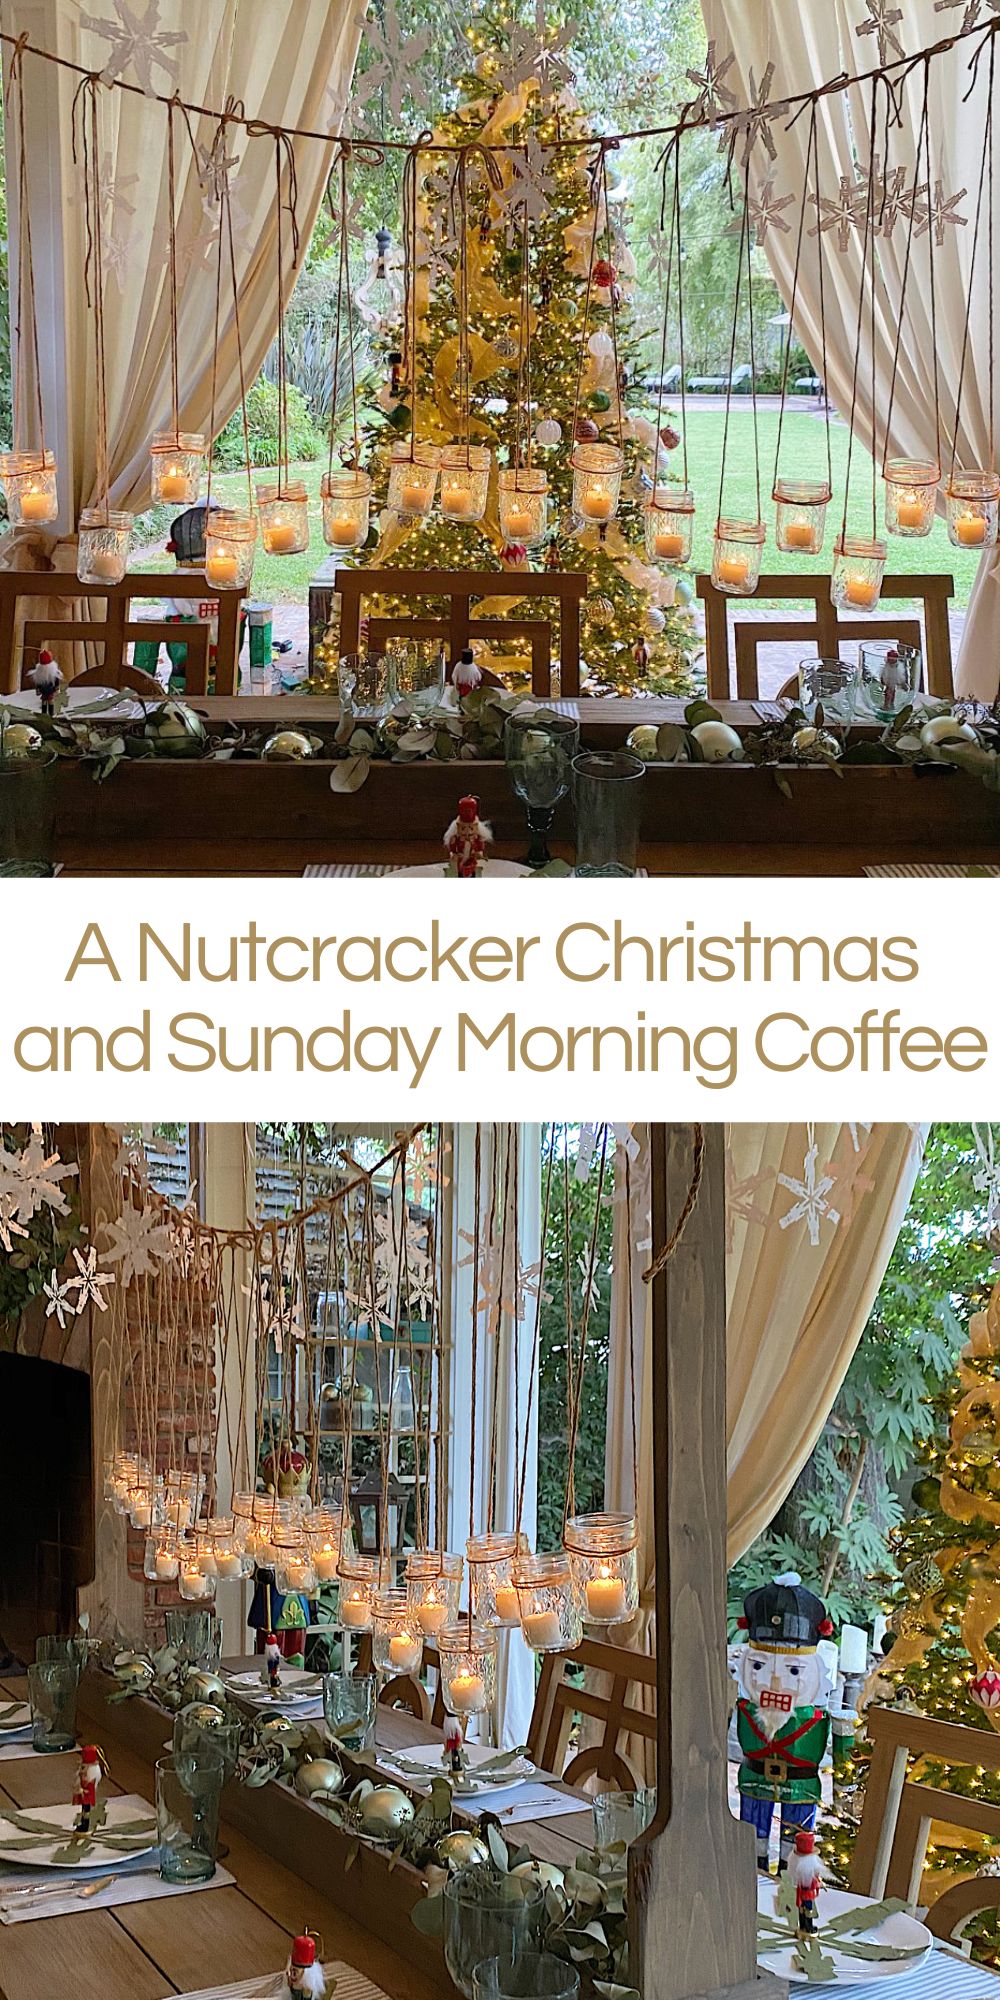 The Nutcracker Christmas story is one of those magical Christmas traditions. If you love the story, you will love this table I created.